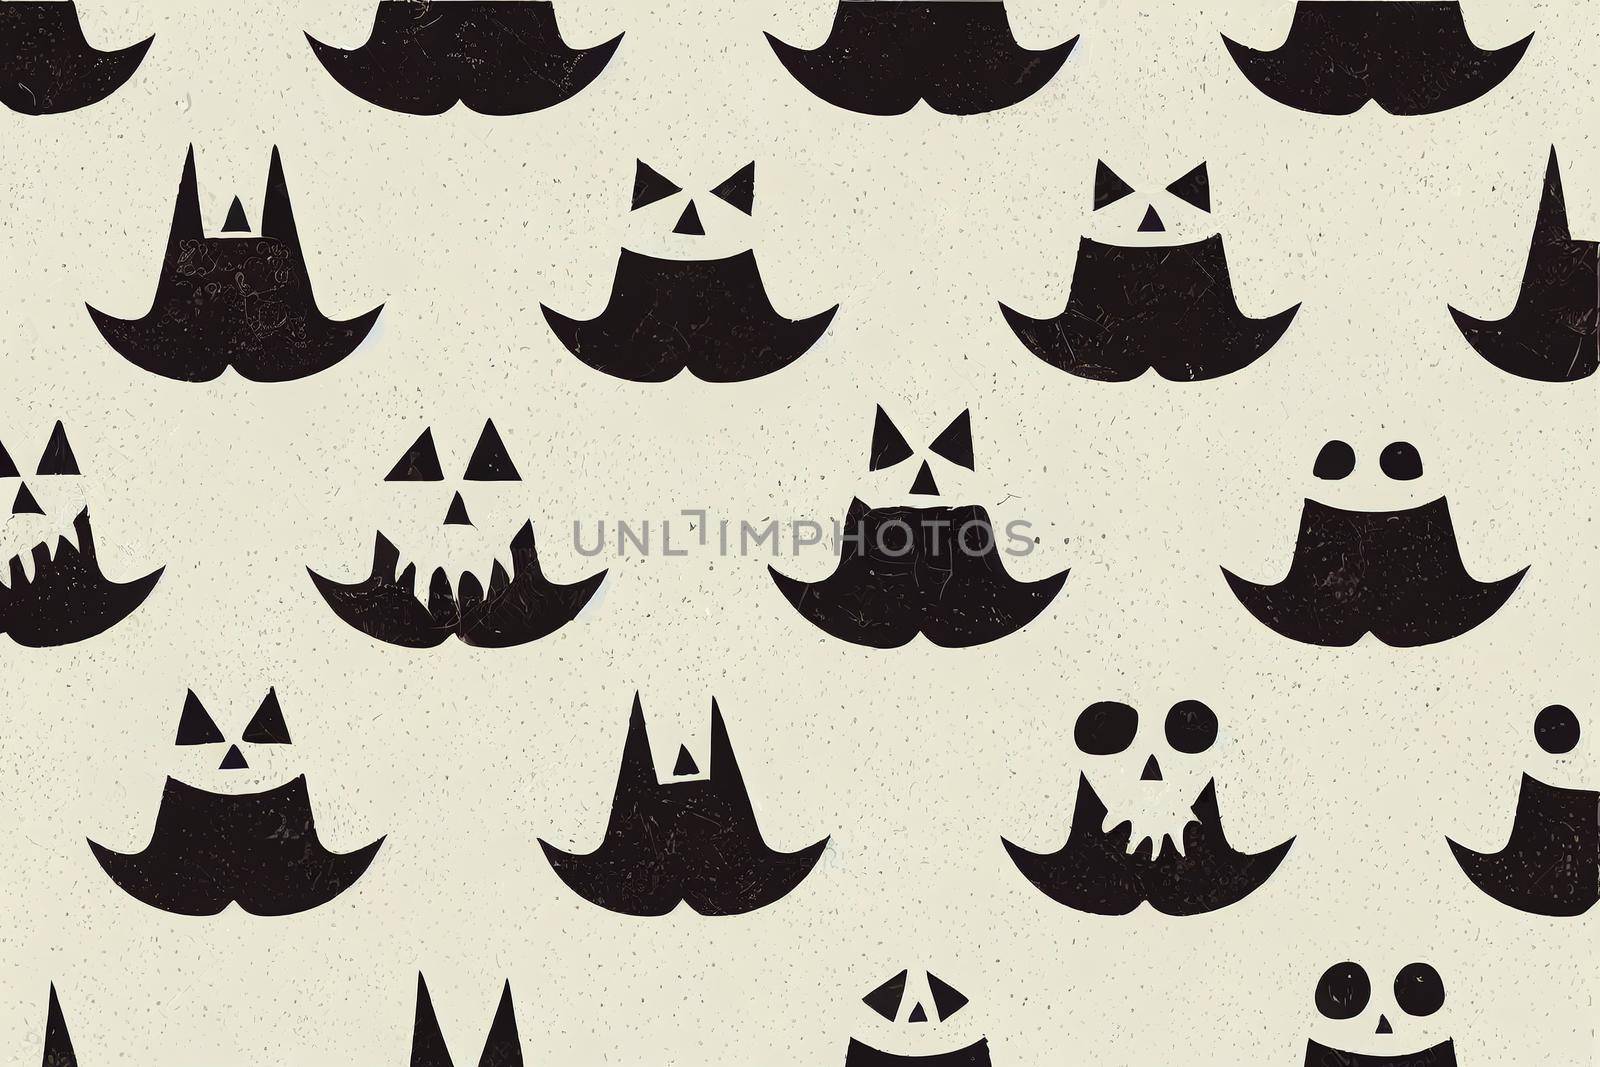 Ghosts, Pumpkins, candles, animal Skulls, Halloween concept, Cute cartoon spooky characters, Holiday Silhouettes, Hand drawn trendy illustration, Square seamless Pattern, background v3